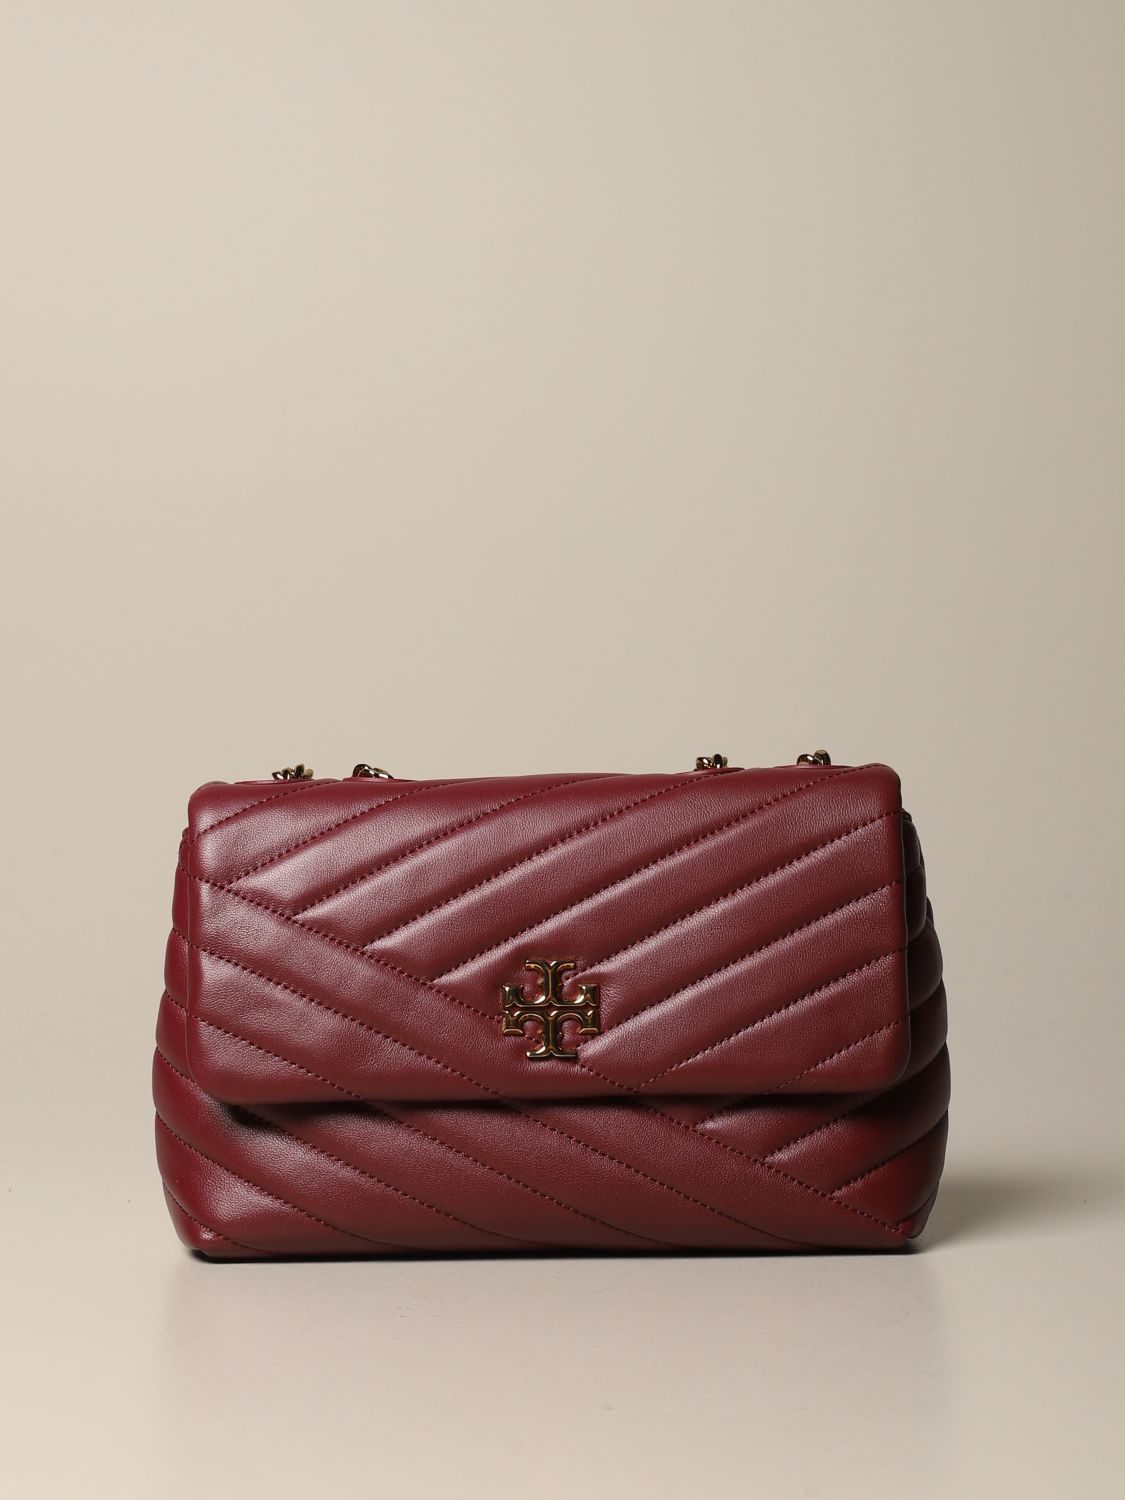 TORY BURCH: Kira bag in quilted leather - Burgundy | Tory Burch ...